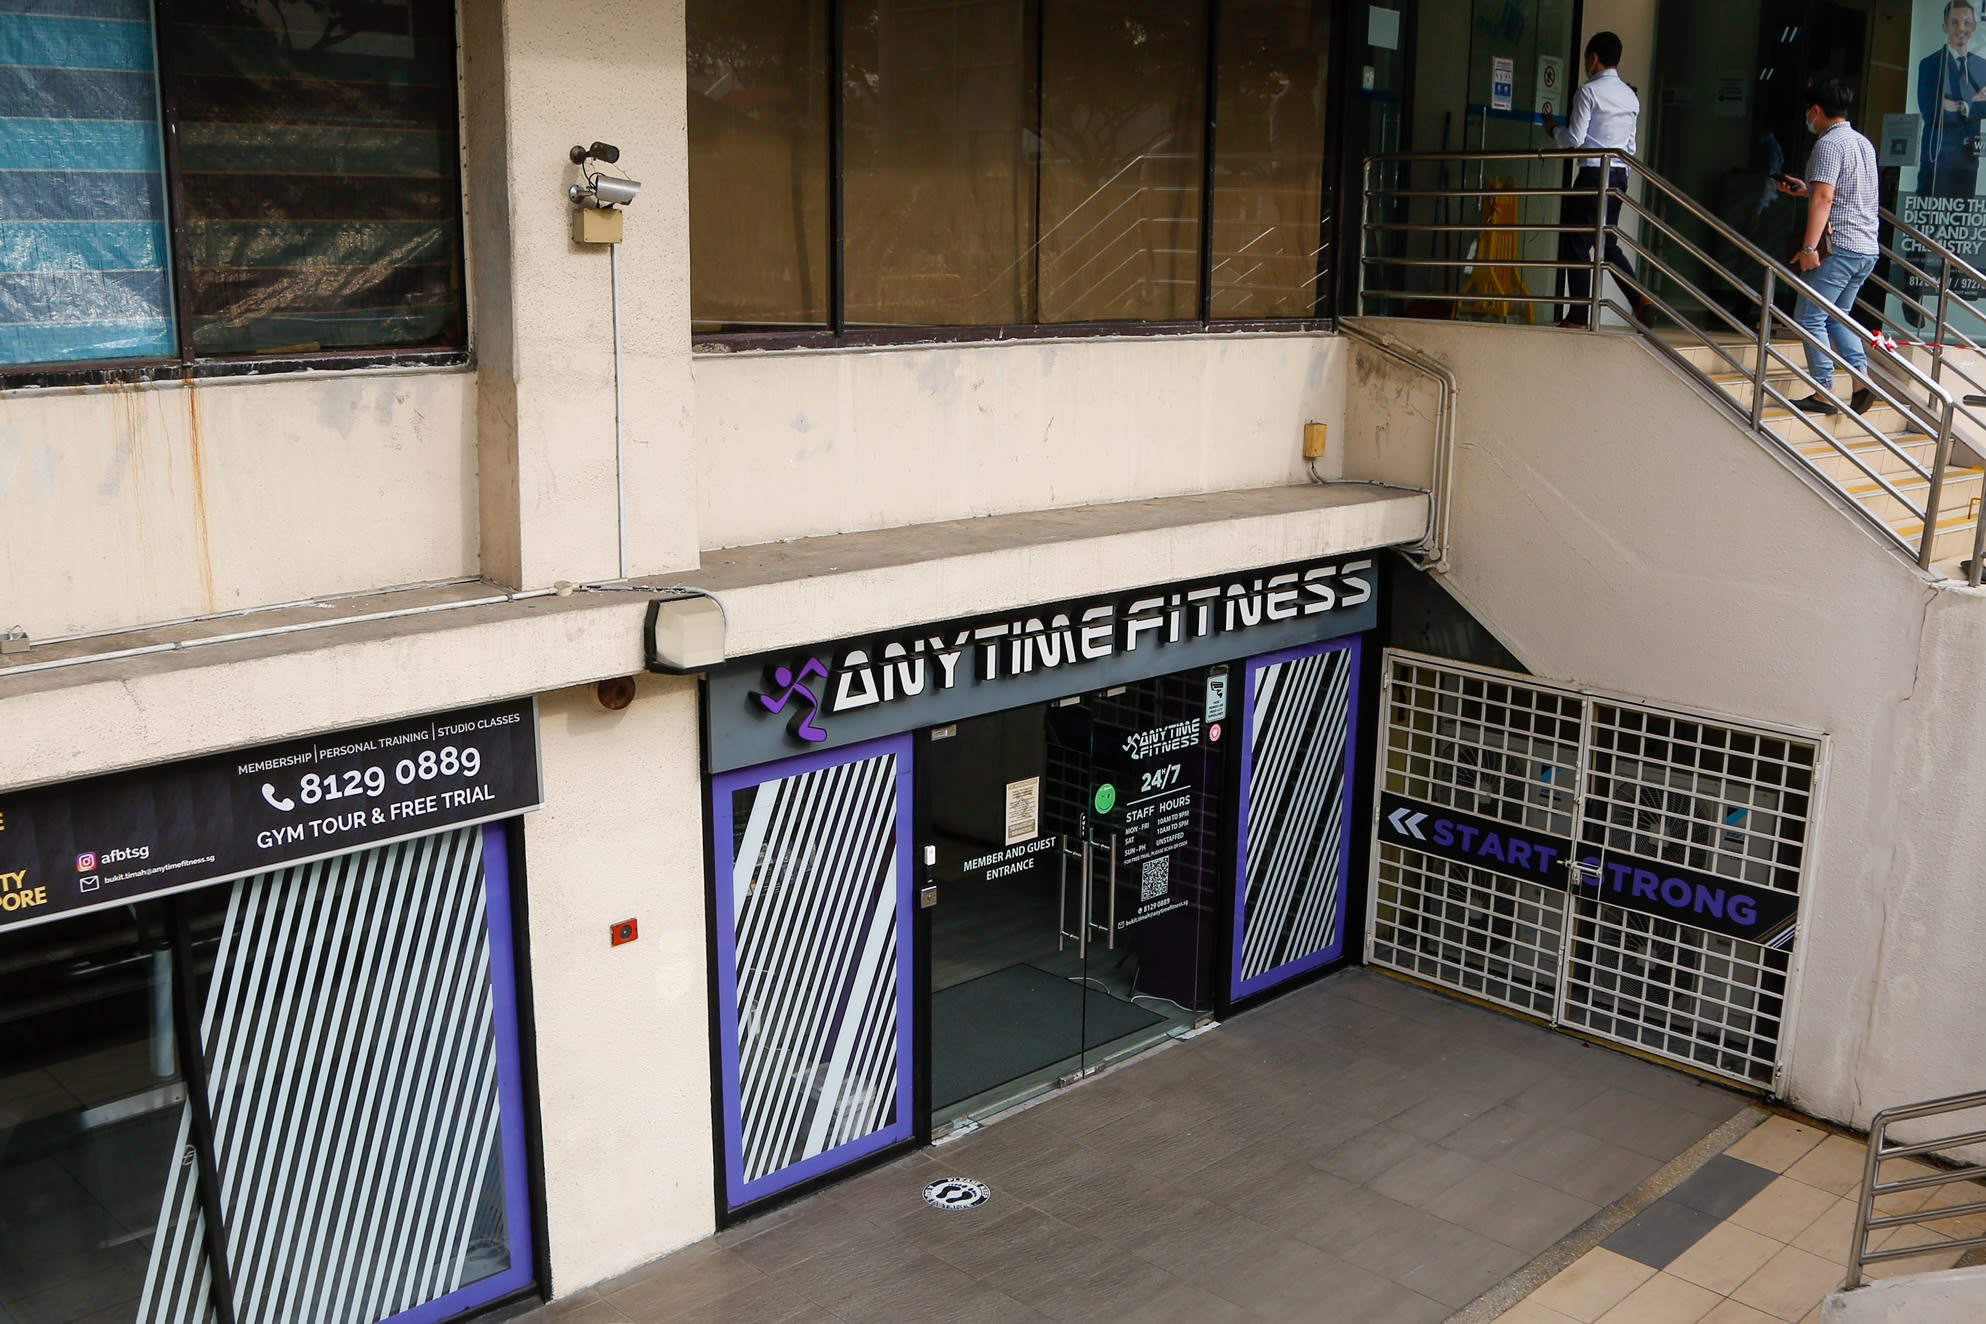 Covid-19 breach: Anytime Fitness gym with suspected Omicron cluster ordered shut for 10 days, fined S$1,000